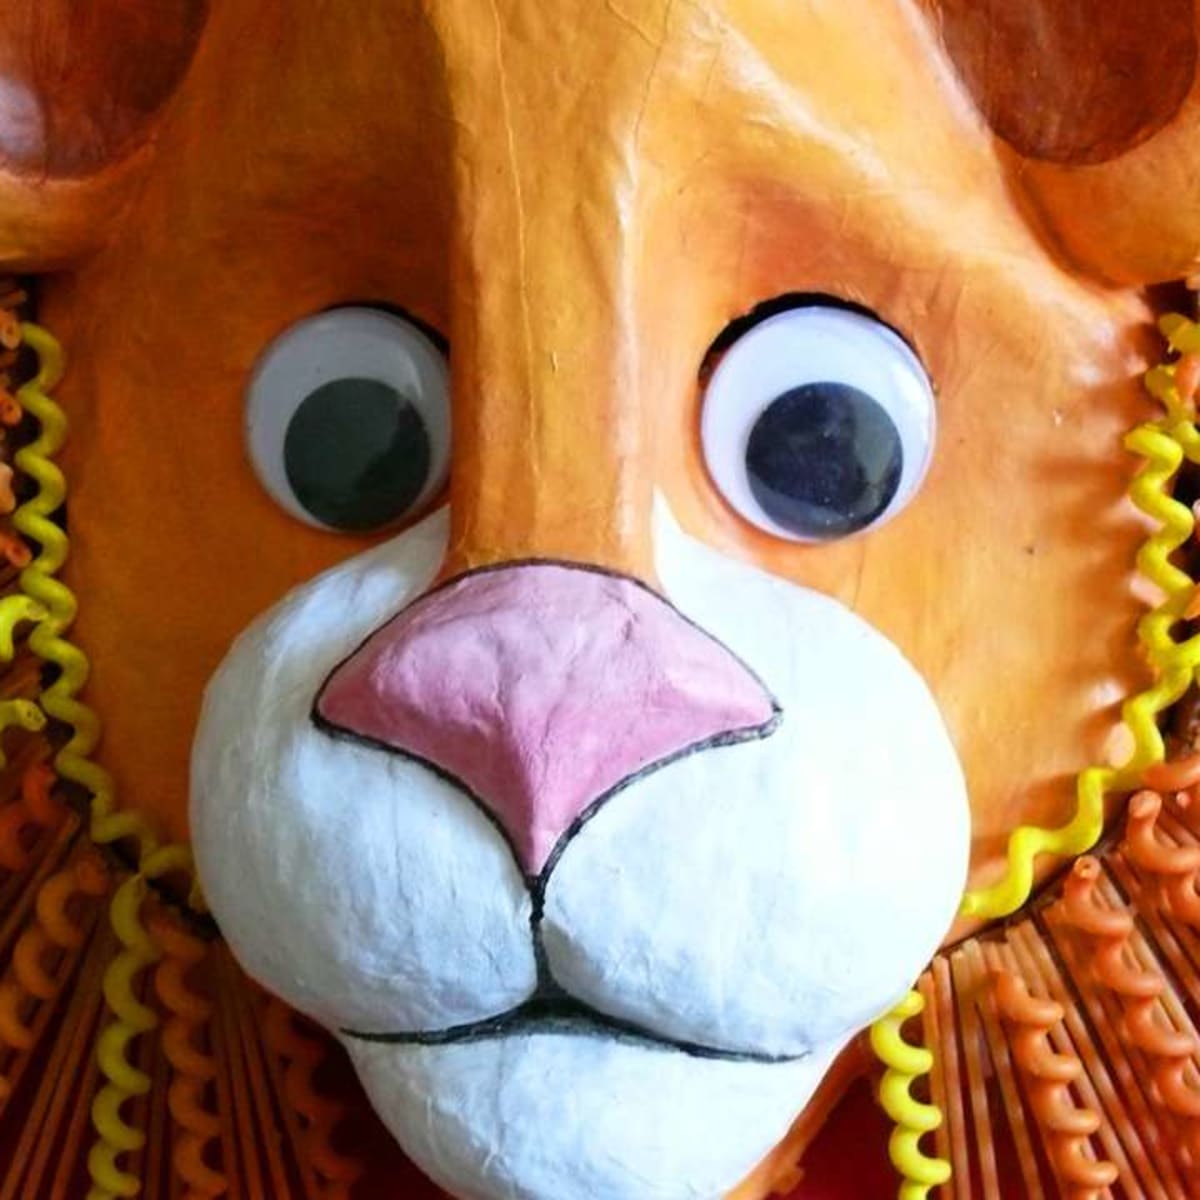 Paper Mache Recipe: How To Make An Animal Mask